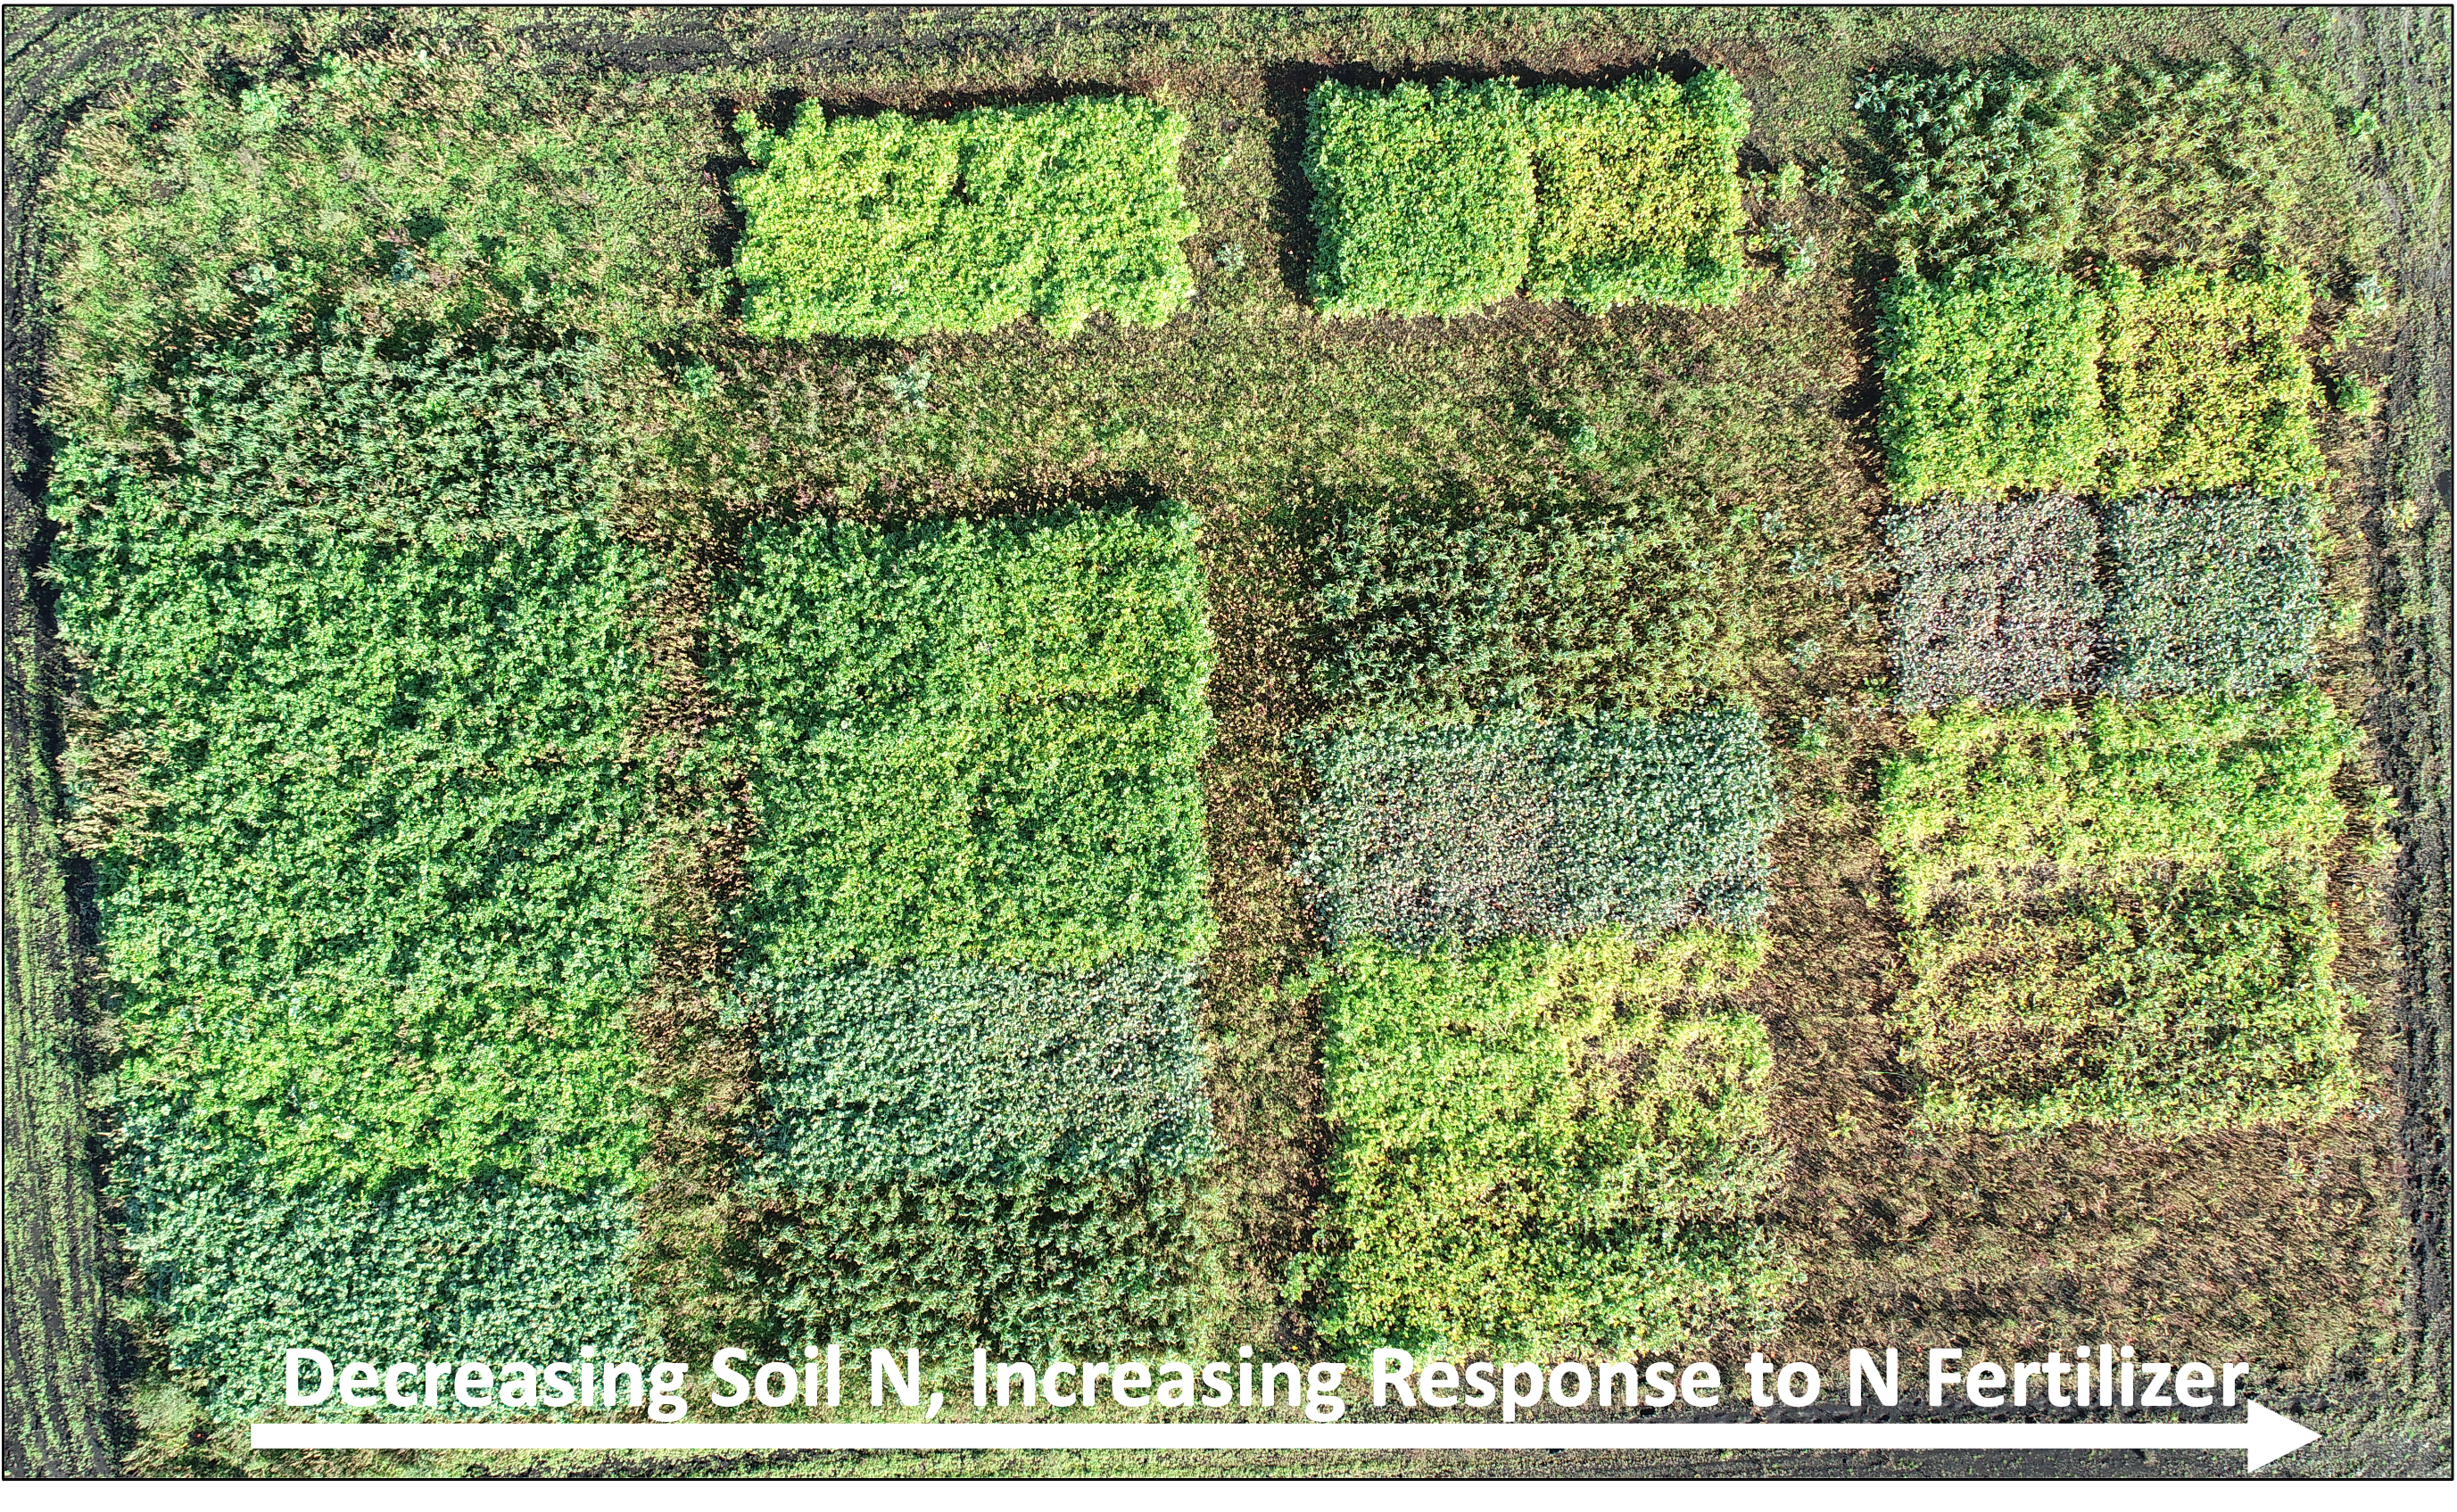 An aerial view of cover crops and their response to nitrogen fertilizer.